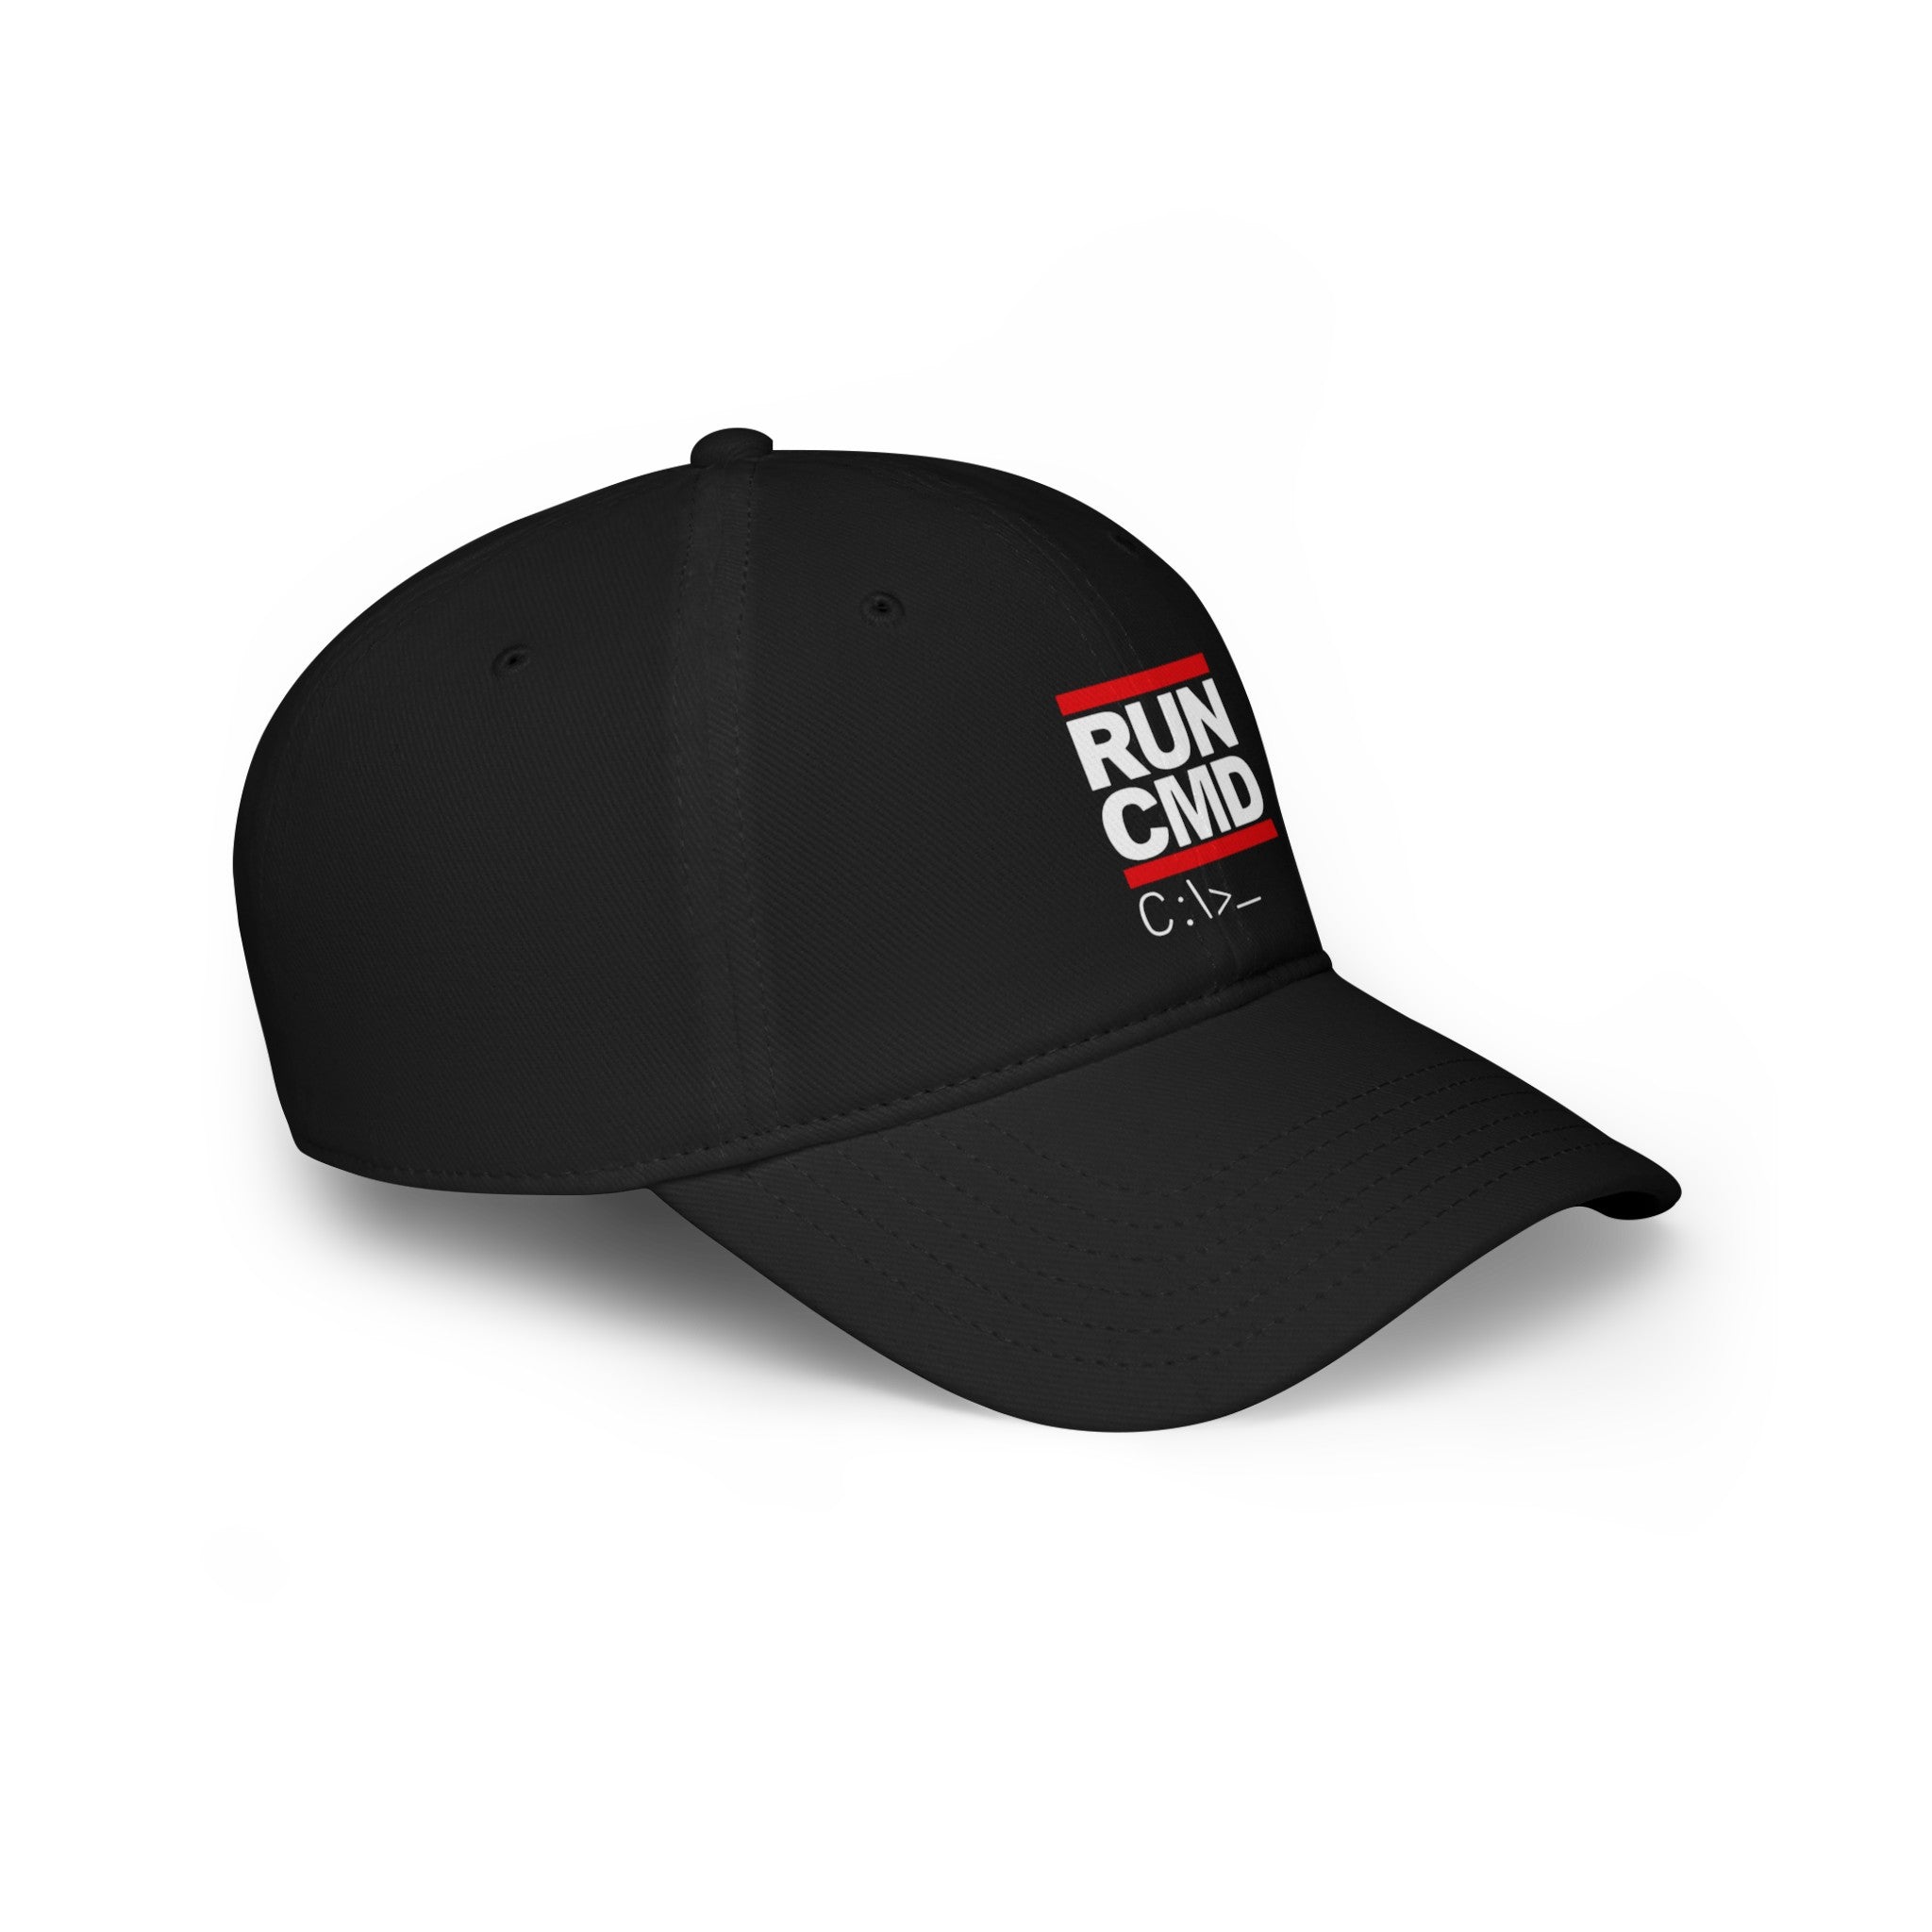 RUN CMD - Hat featuring a "RUN CMD" logo in red and white, with "C:\>" text underneath, crafted with reinforced stitching for durability.